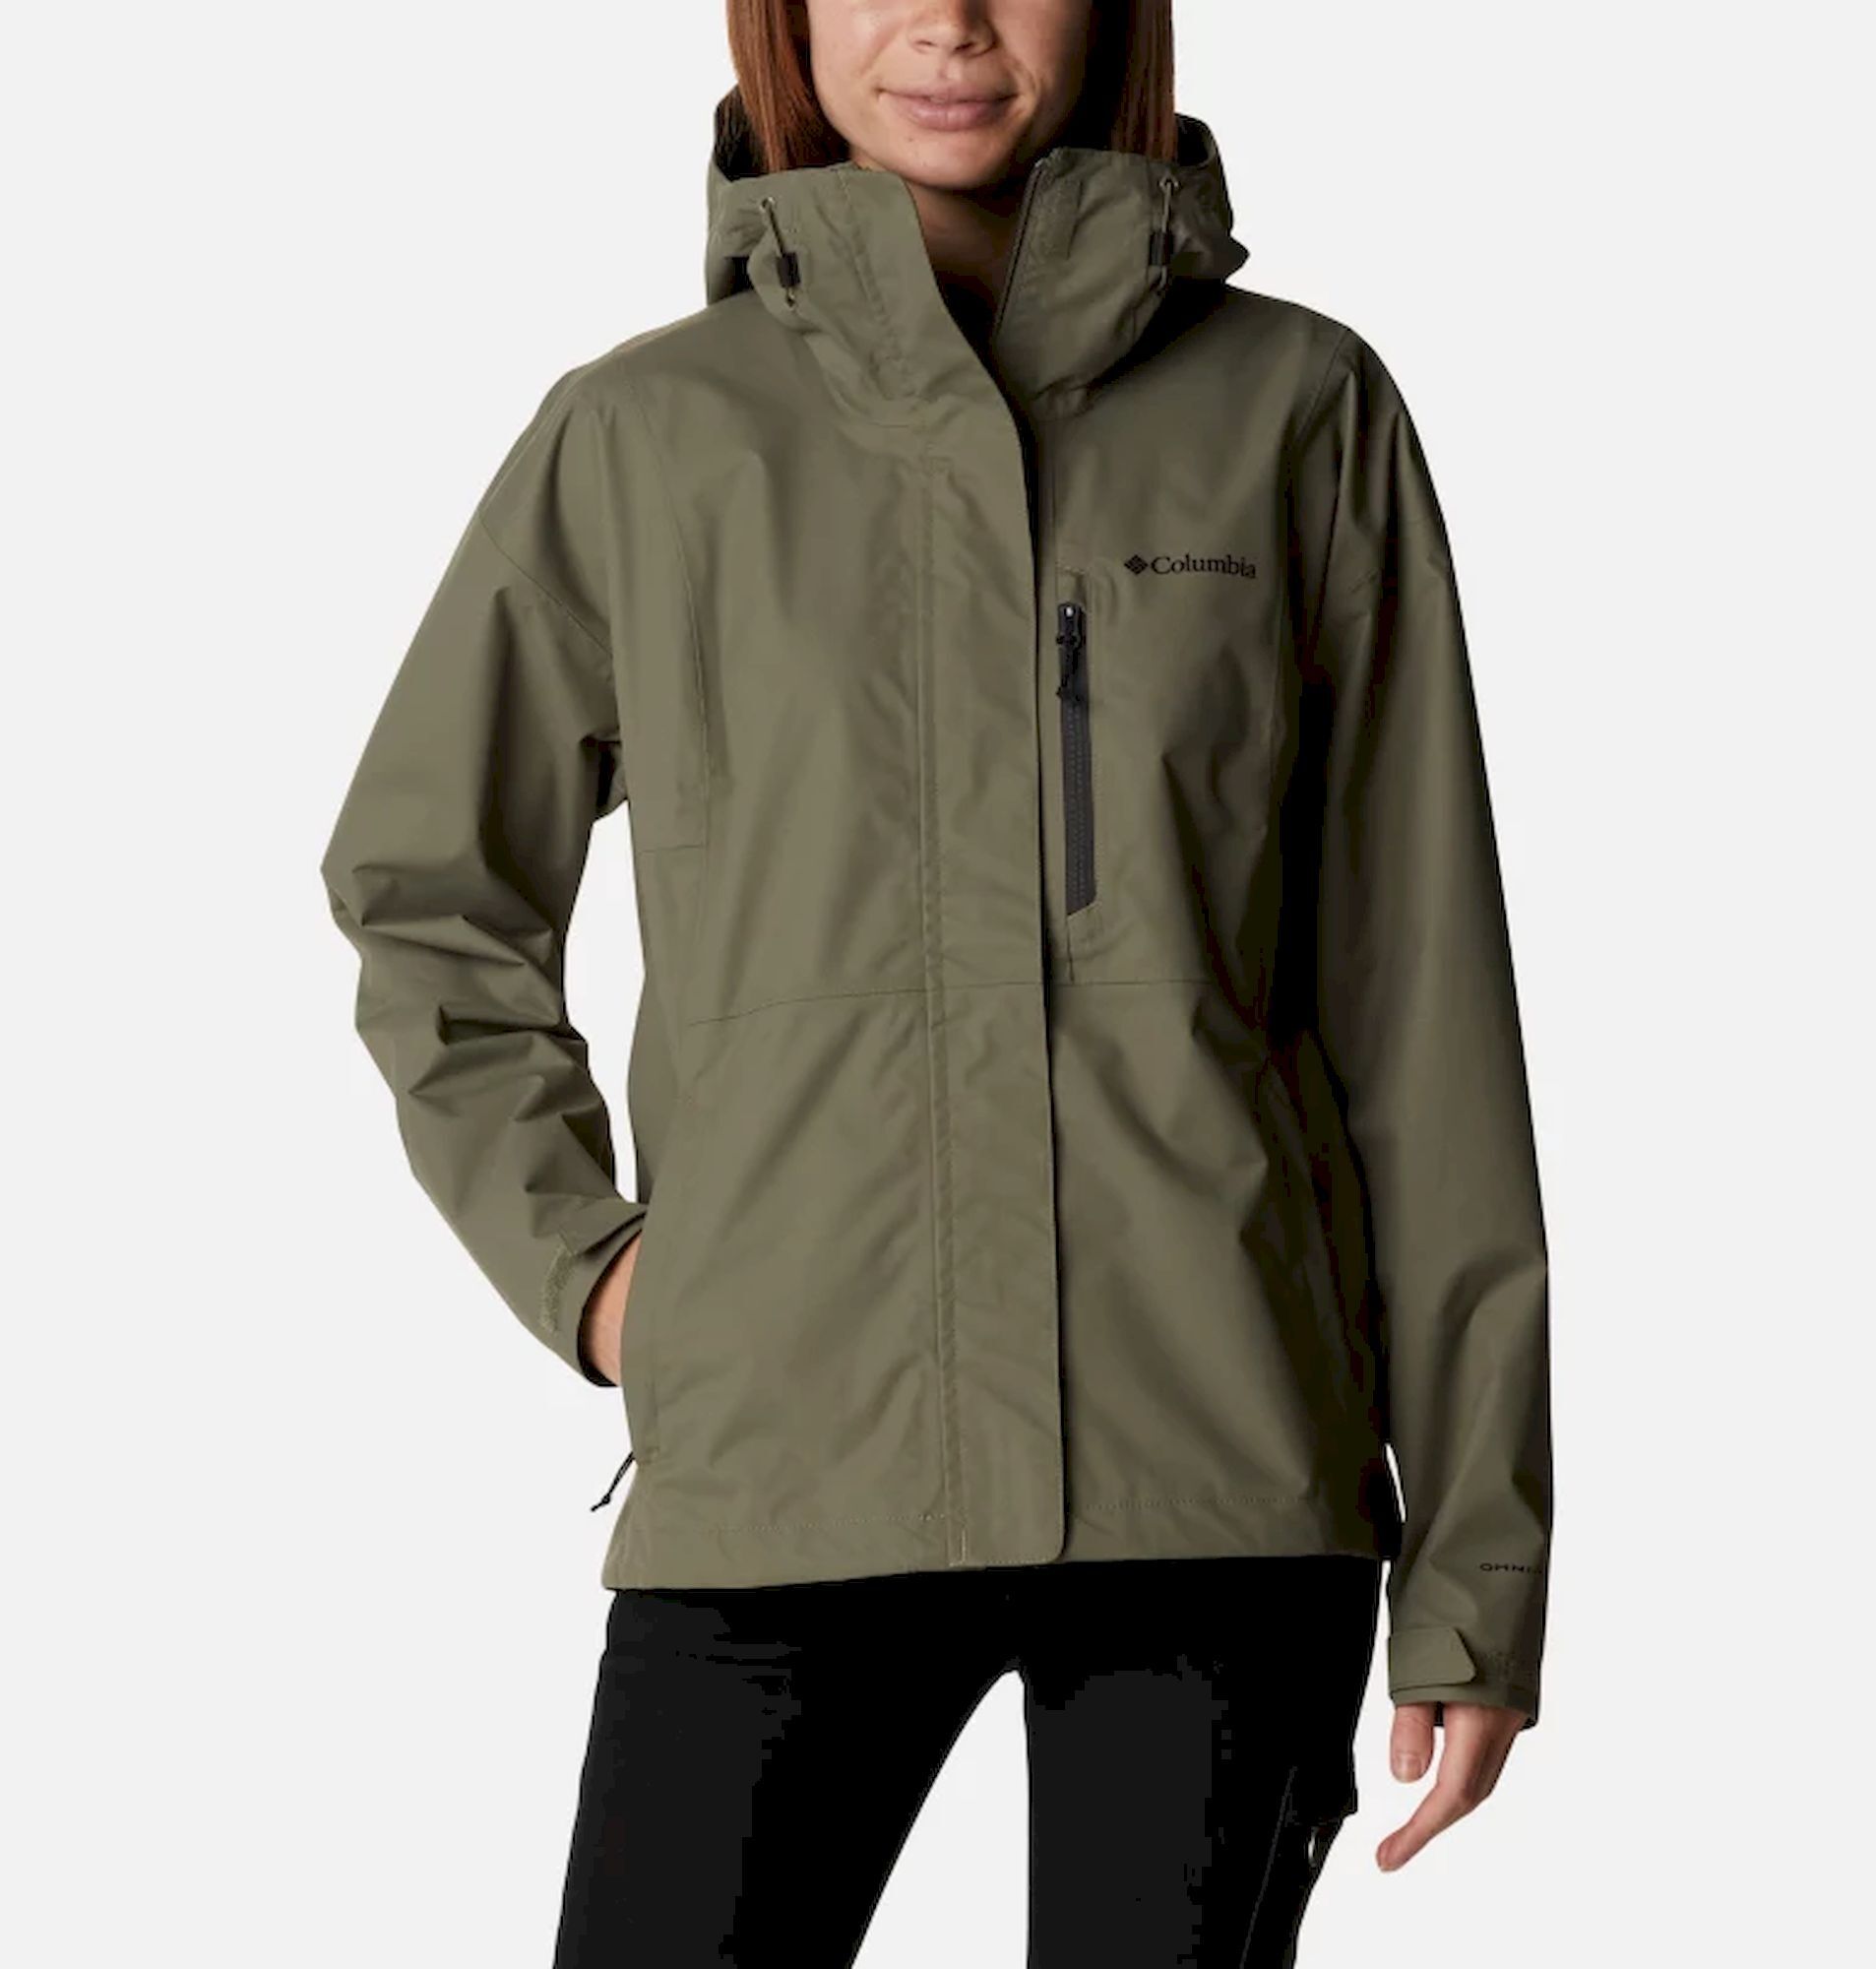 Columbia Hikebound Jacket - Chaqueta impermeable - Mujer | Hardloop